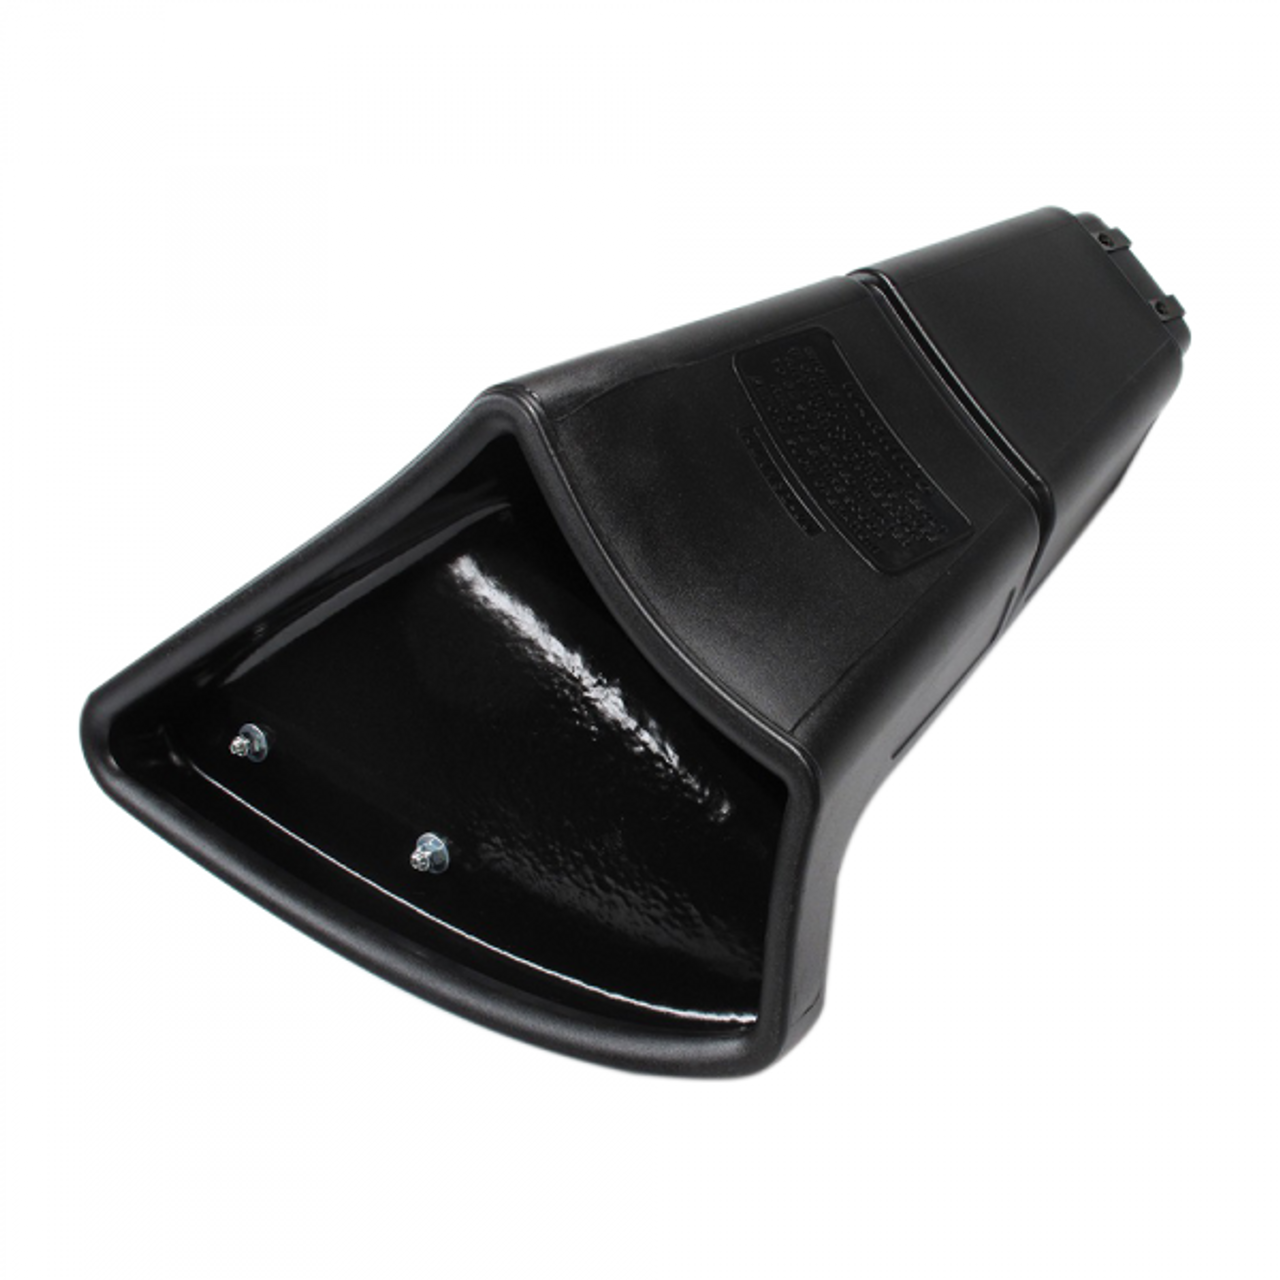 Air Scoop for S&B Intakes 75-5040/75-5040D